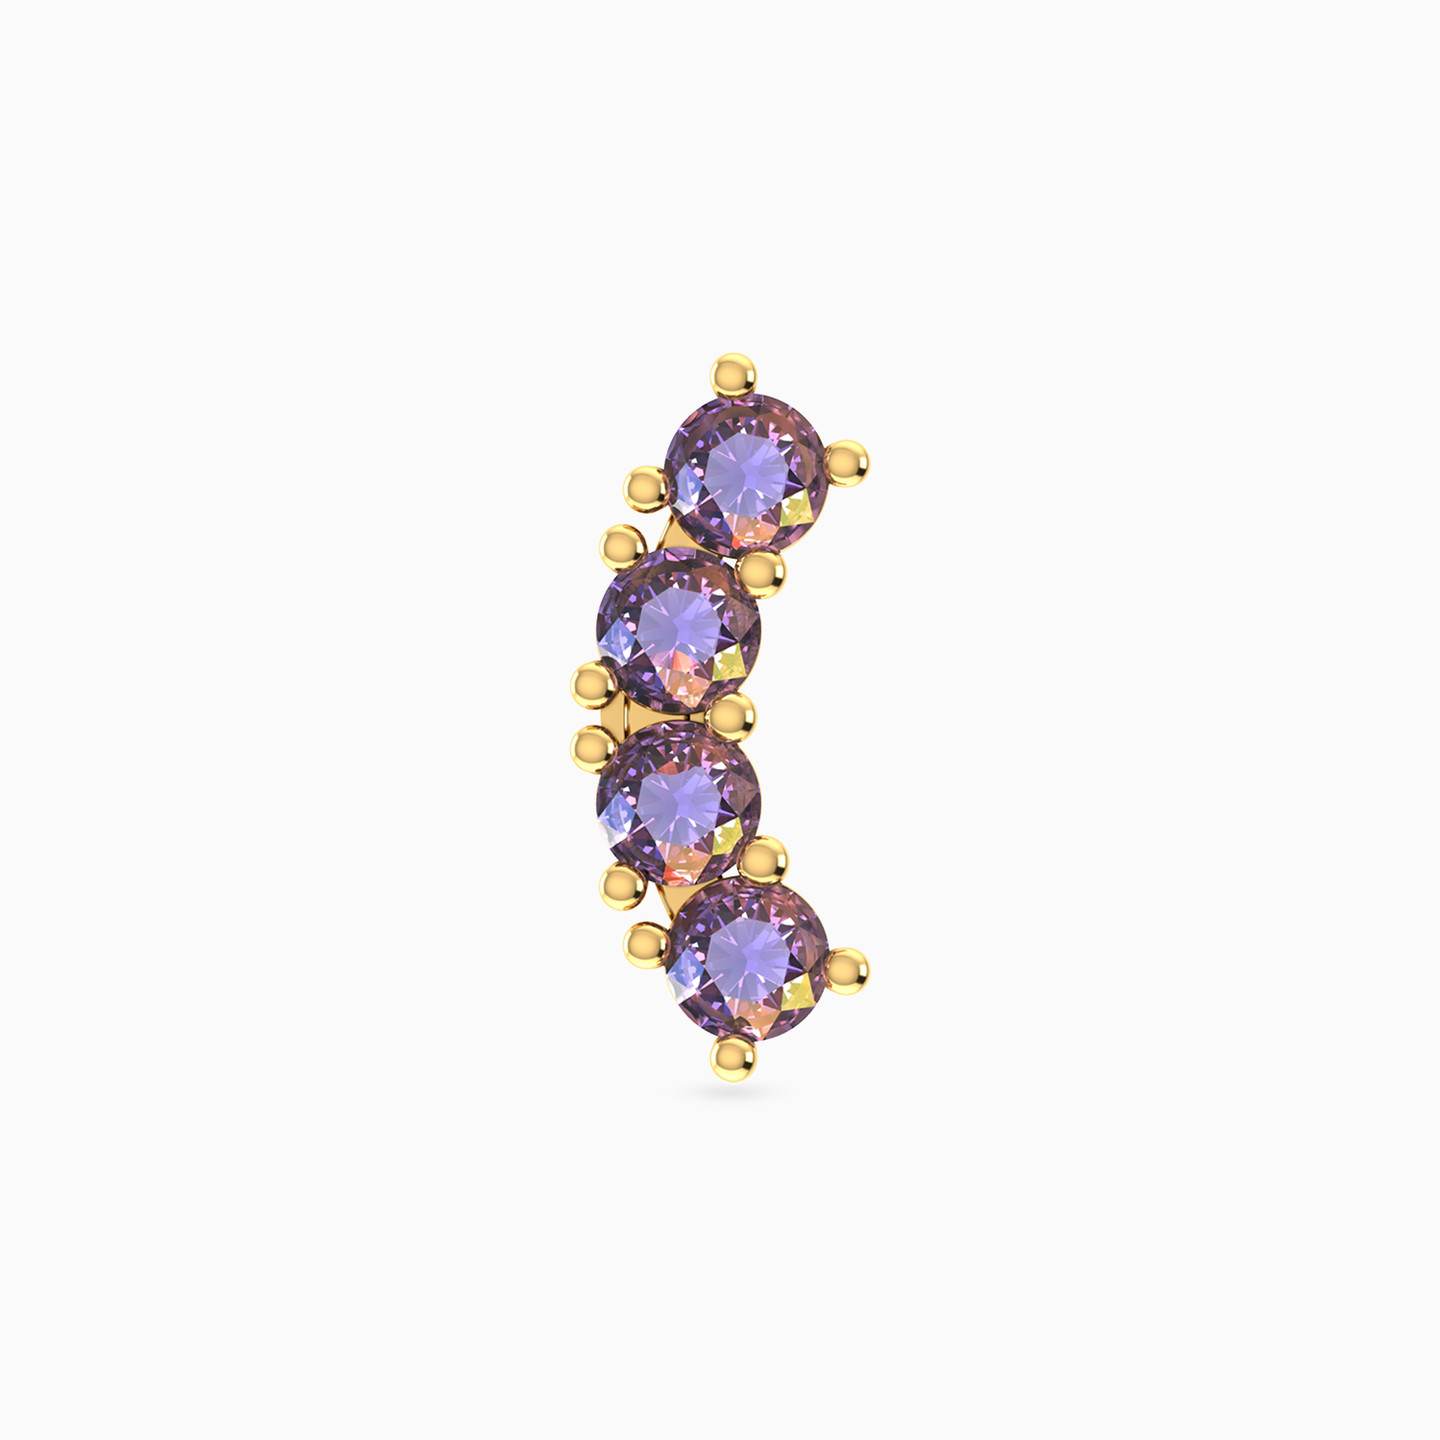 Round Shaped Colored Stones Stud Earring in 14K Gold - 1 Piece - 4